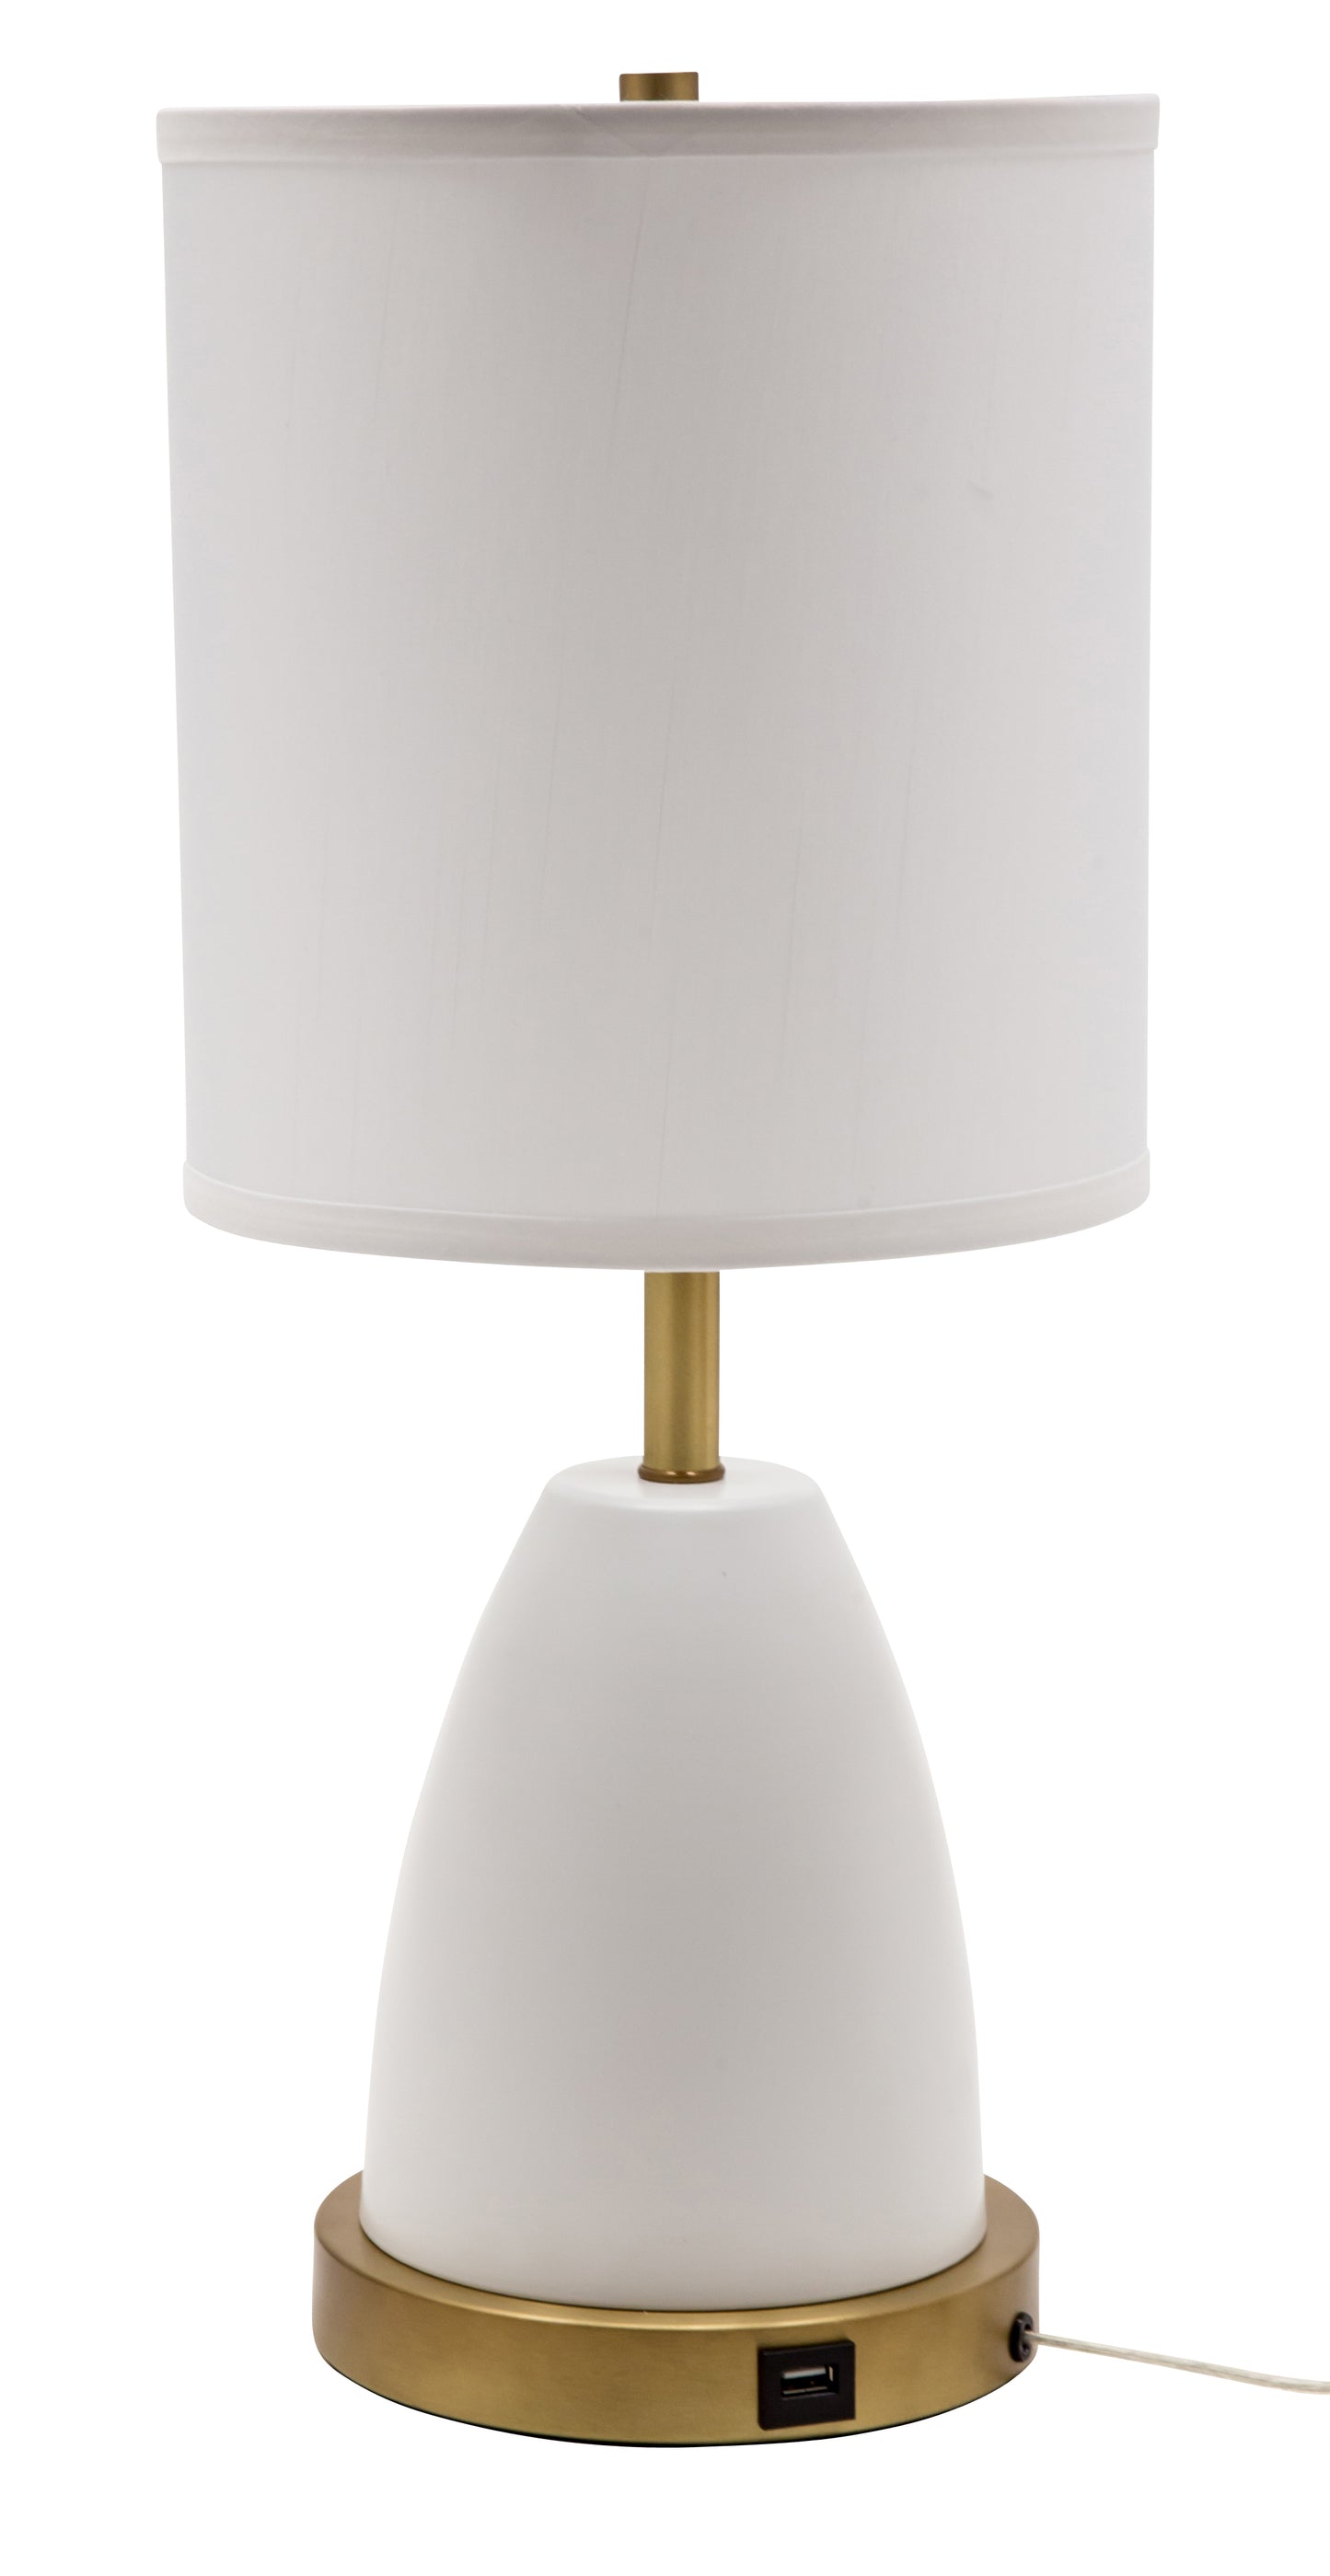 House of Troy Rupert Table Lamp White Weathered Brass Accents USB Port RU751-WT